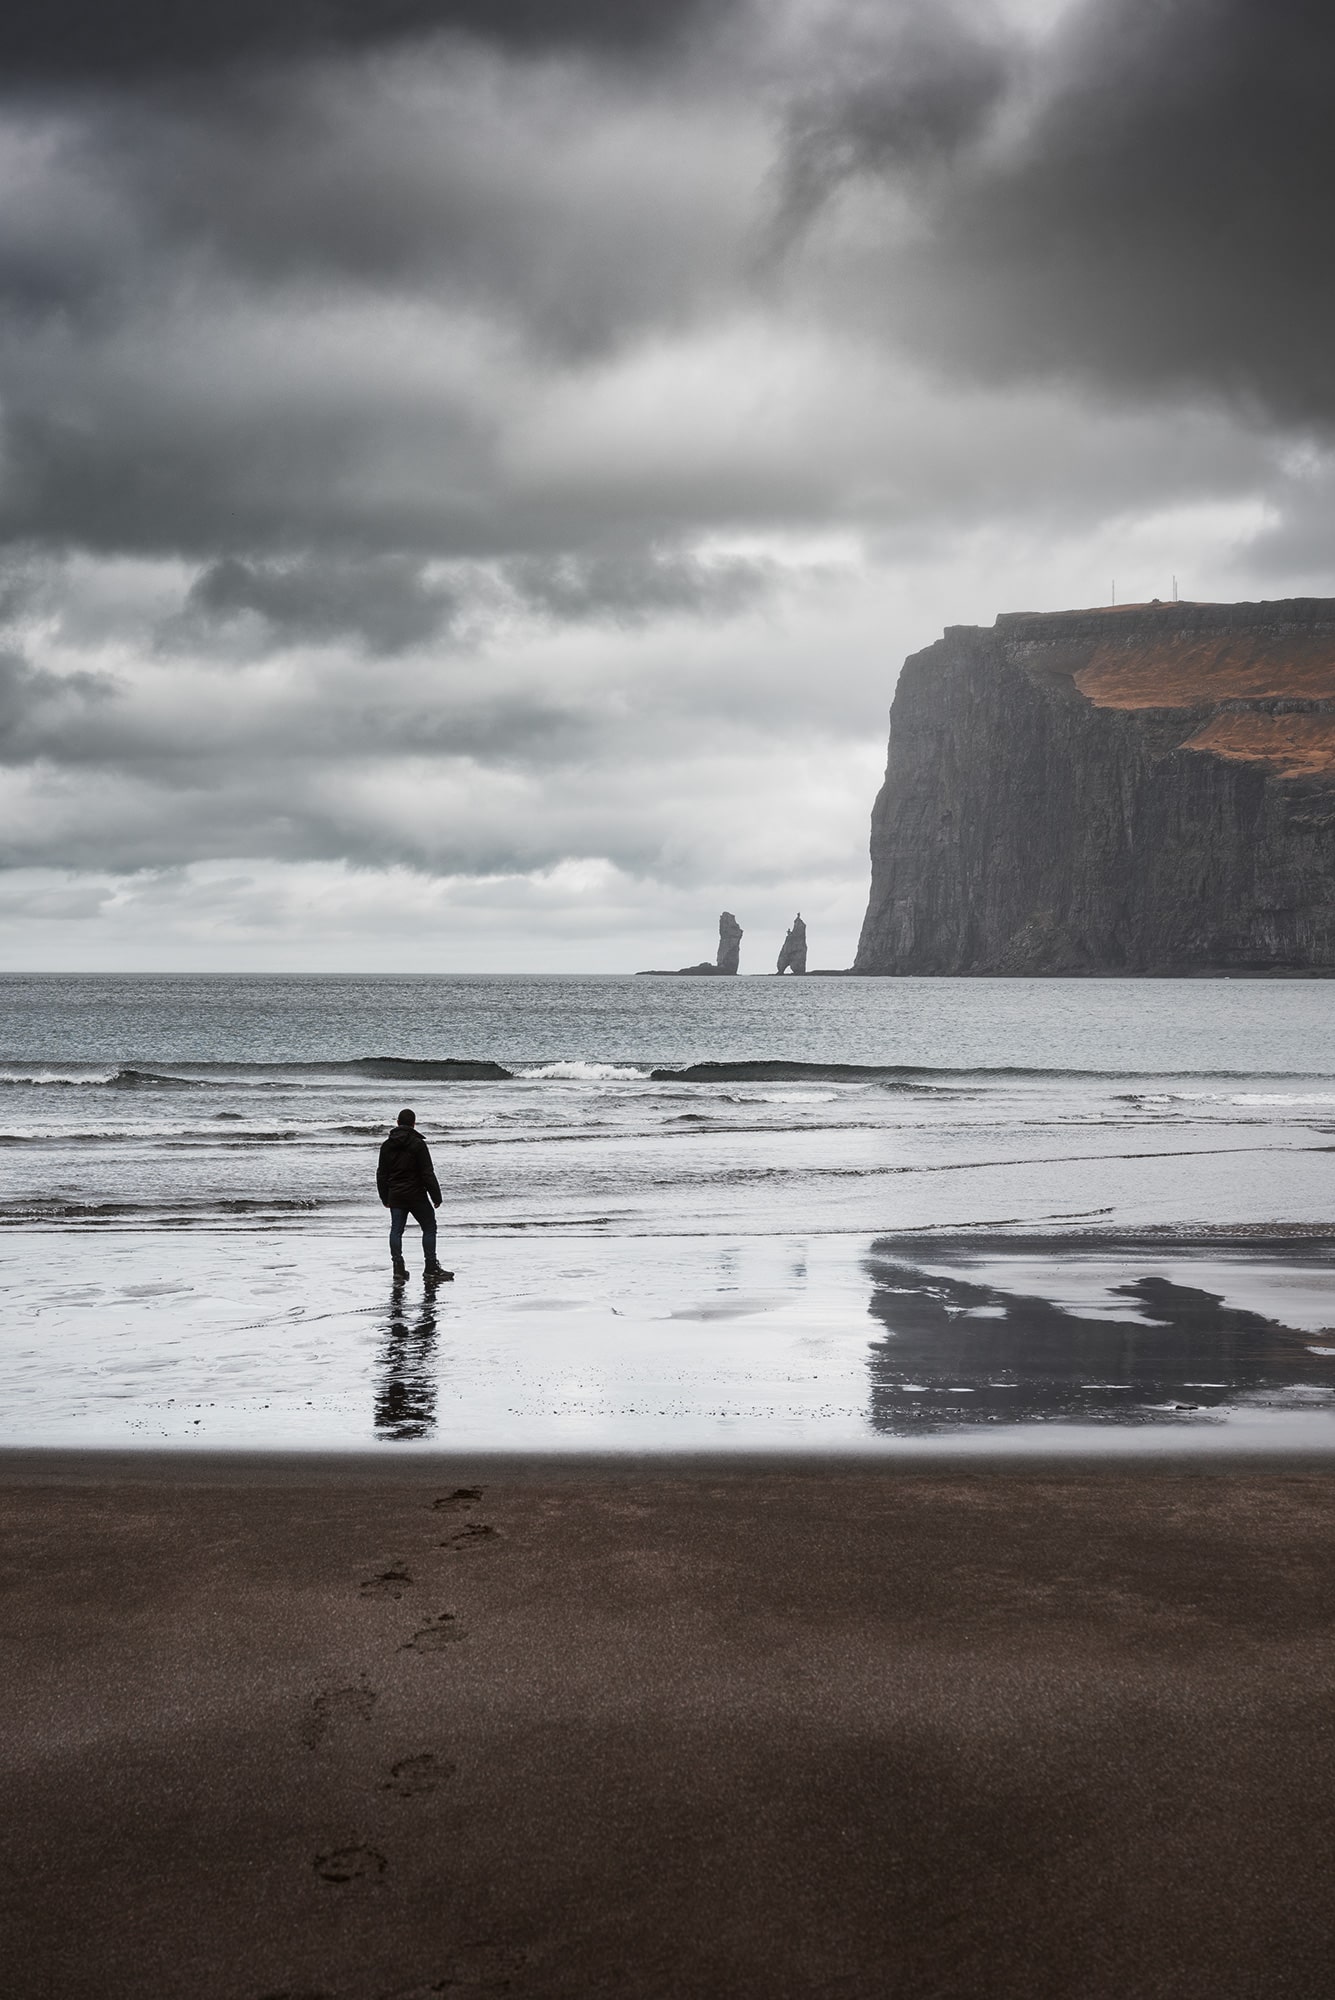 Embark on a visual journey through breathtaking landscape photography, featuring a captivating image of a man gazing upon the two sea stacks from the black sand beach of Tjørnuvík, nestled in the northernmost village of Streymoy island in the Faroe Islands. Immerse yourself in the rugged beauty of this remote location as the waves crash against the shoreline, creating a mesmerizing scene against the dramatic cliffs. Witness the harmonious blend of nature's elements captured in this evocative composition.